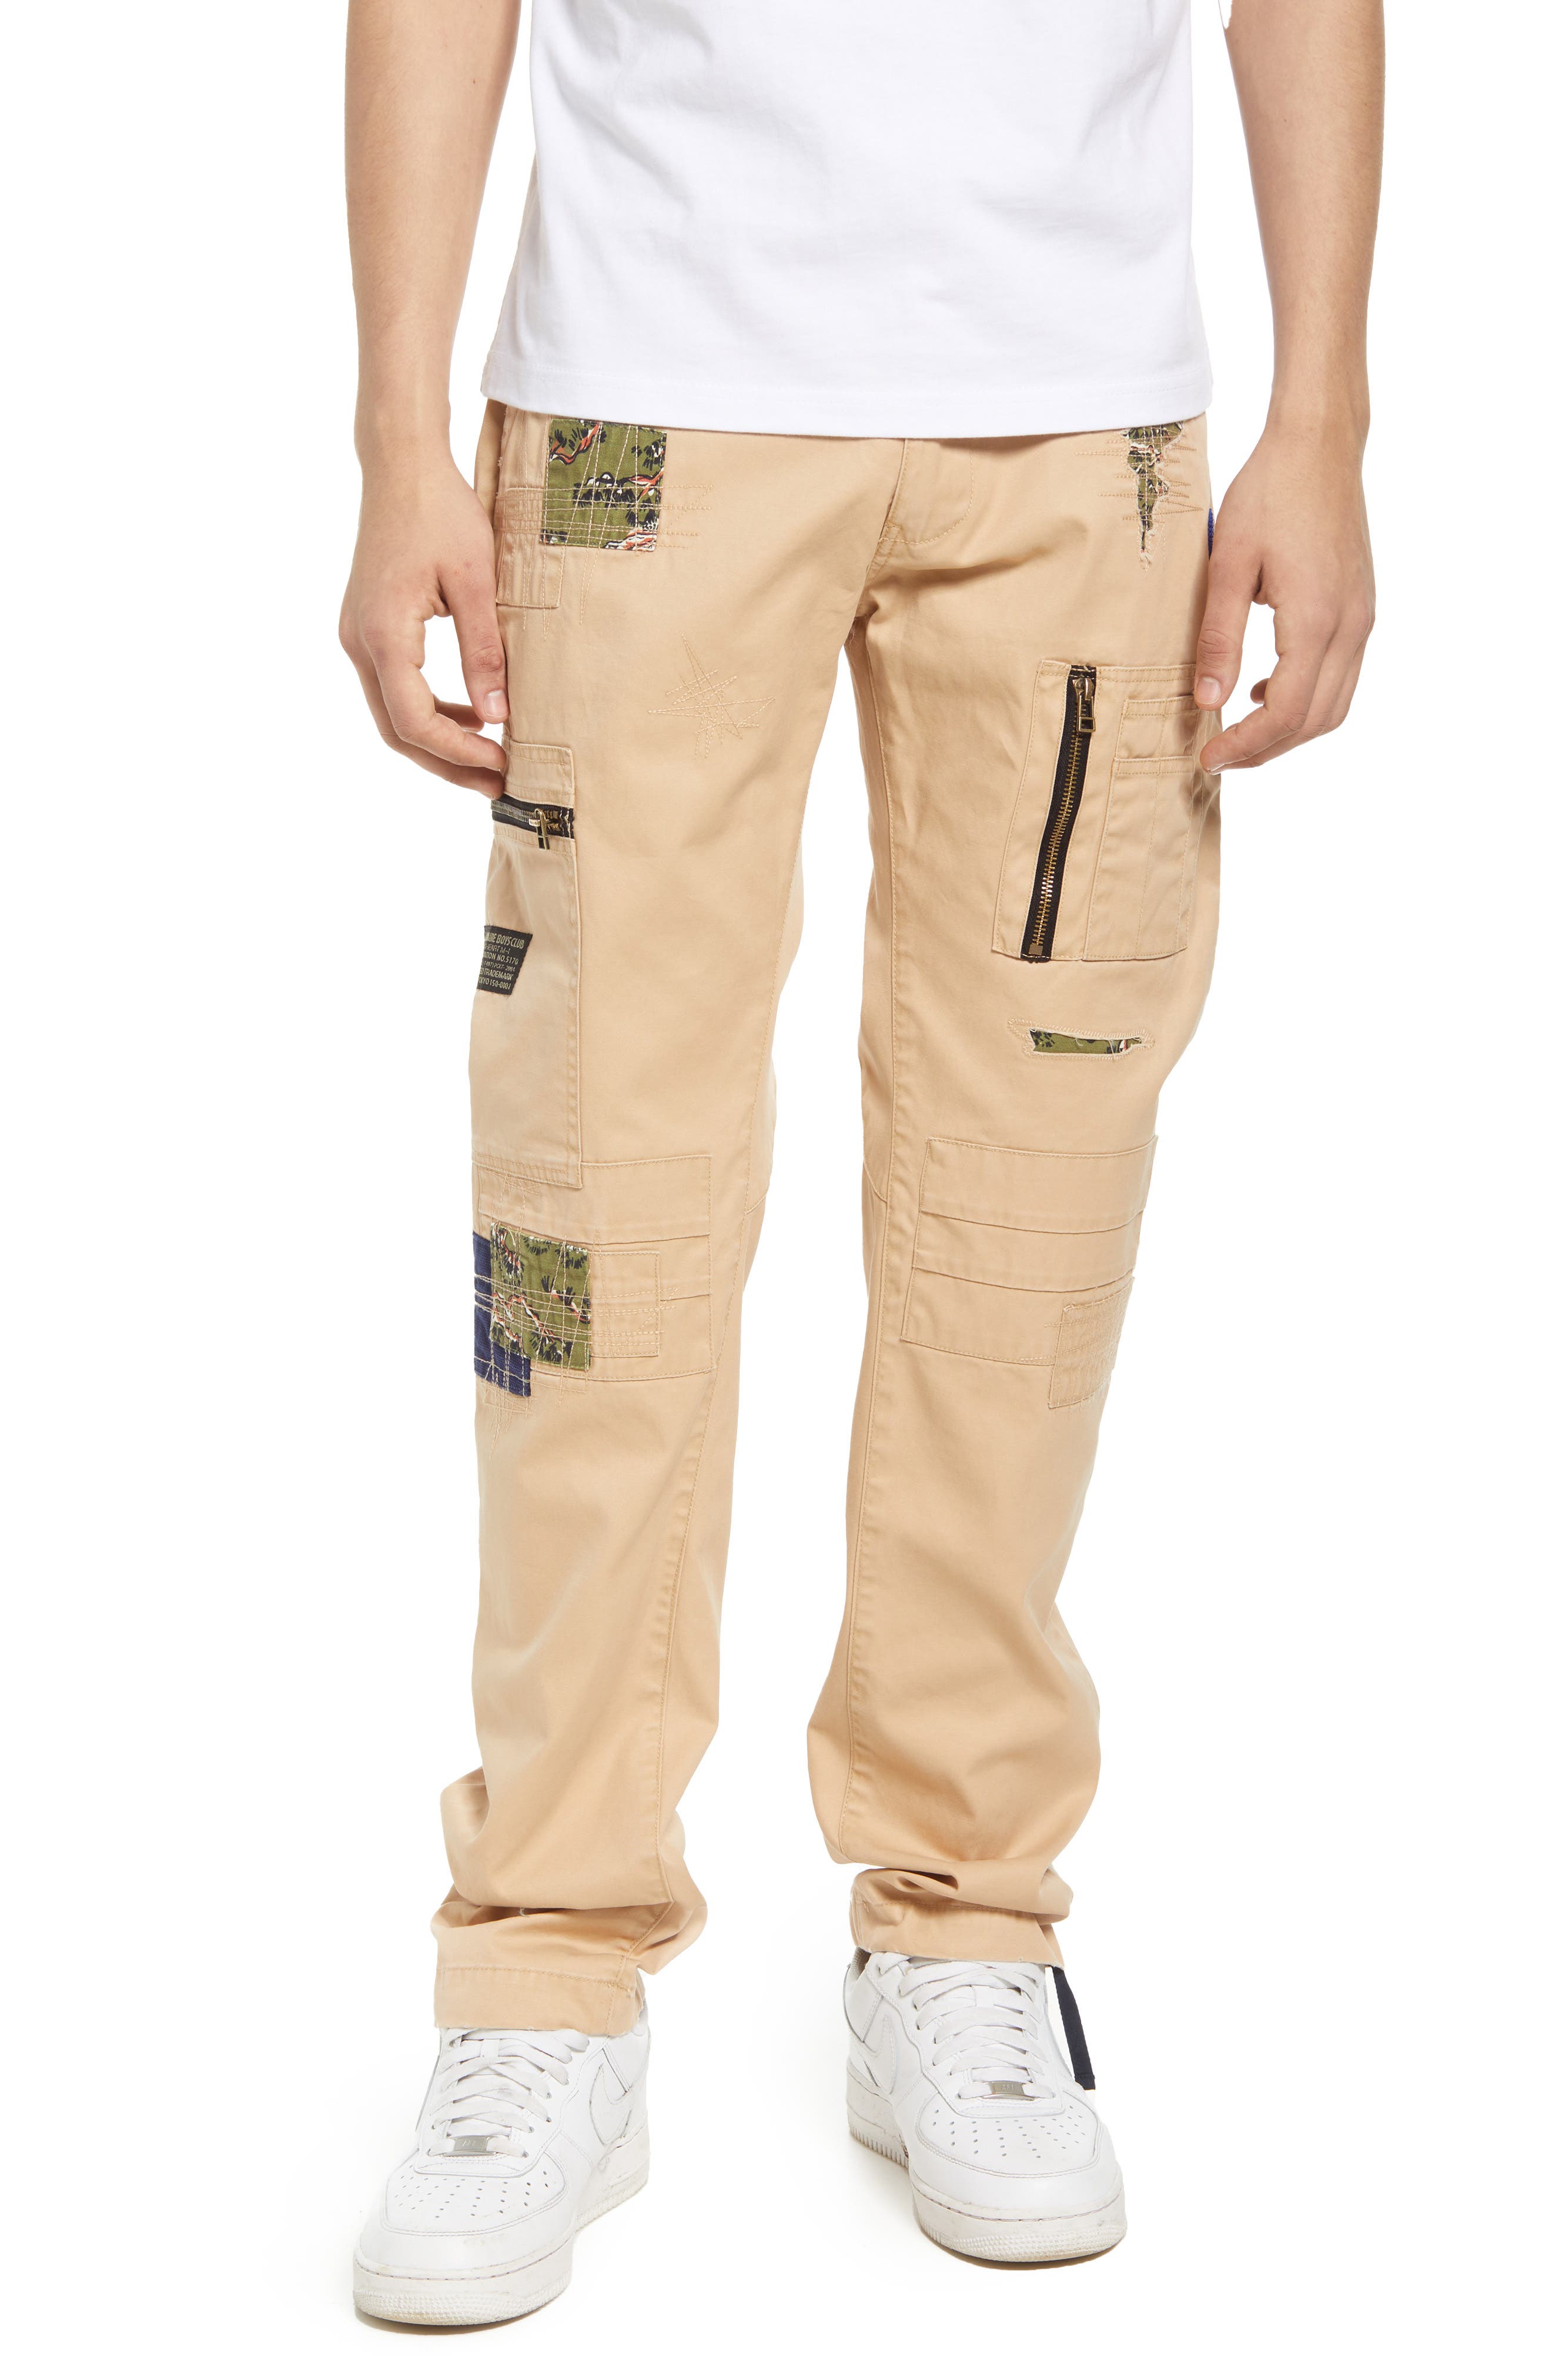 Billionaire Boys Club Men's BB Earth Cargo Pants in Curds And Whey at Nordstrom, Size 30